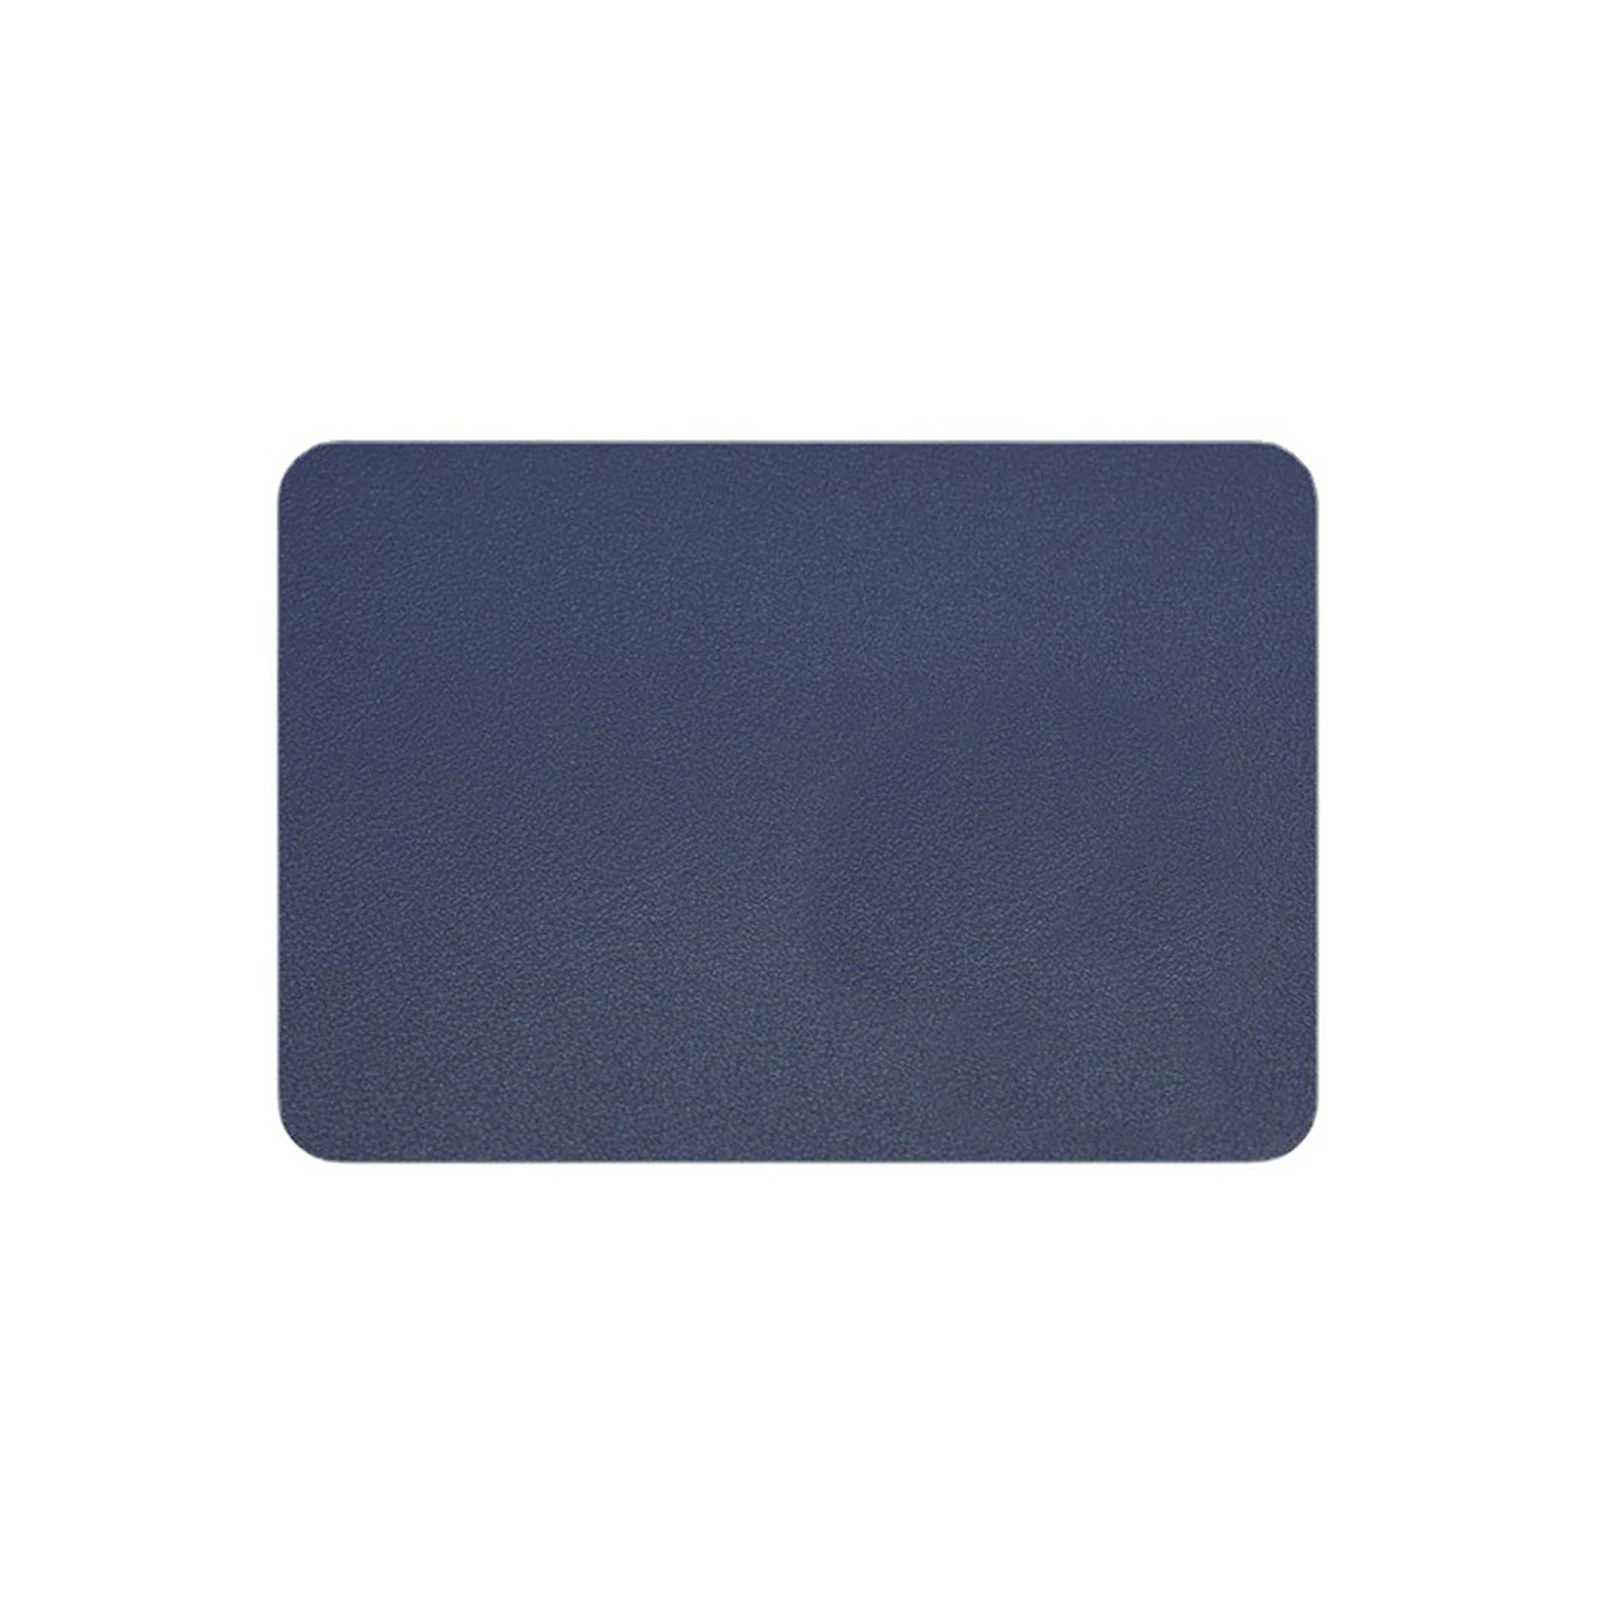 Small Size Office Mouse Pad Colorful Double-side W...